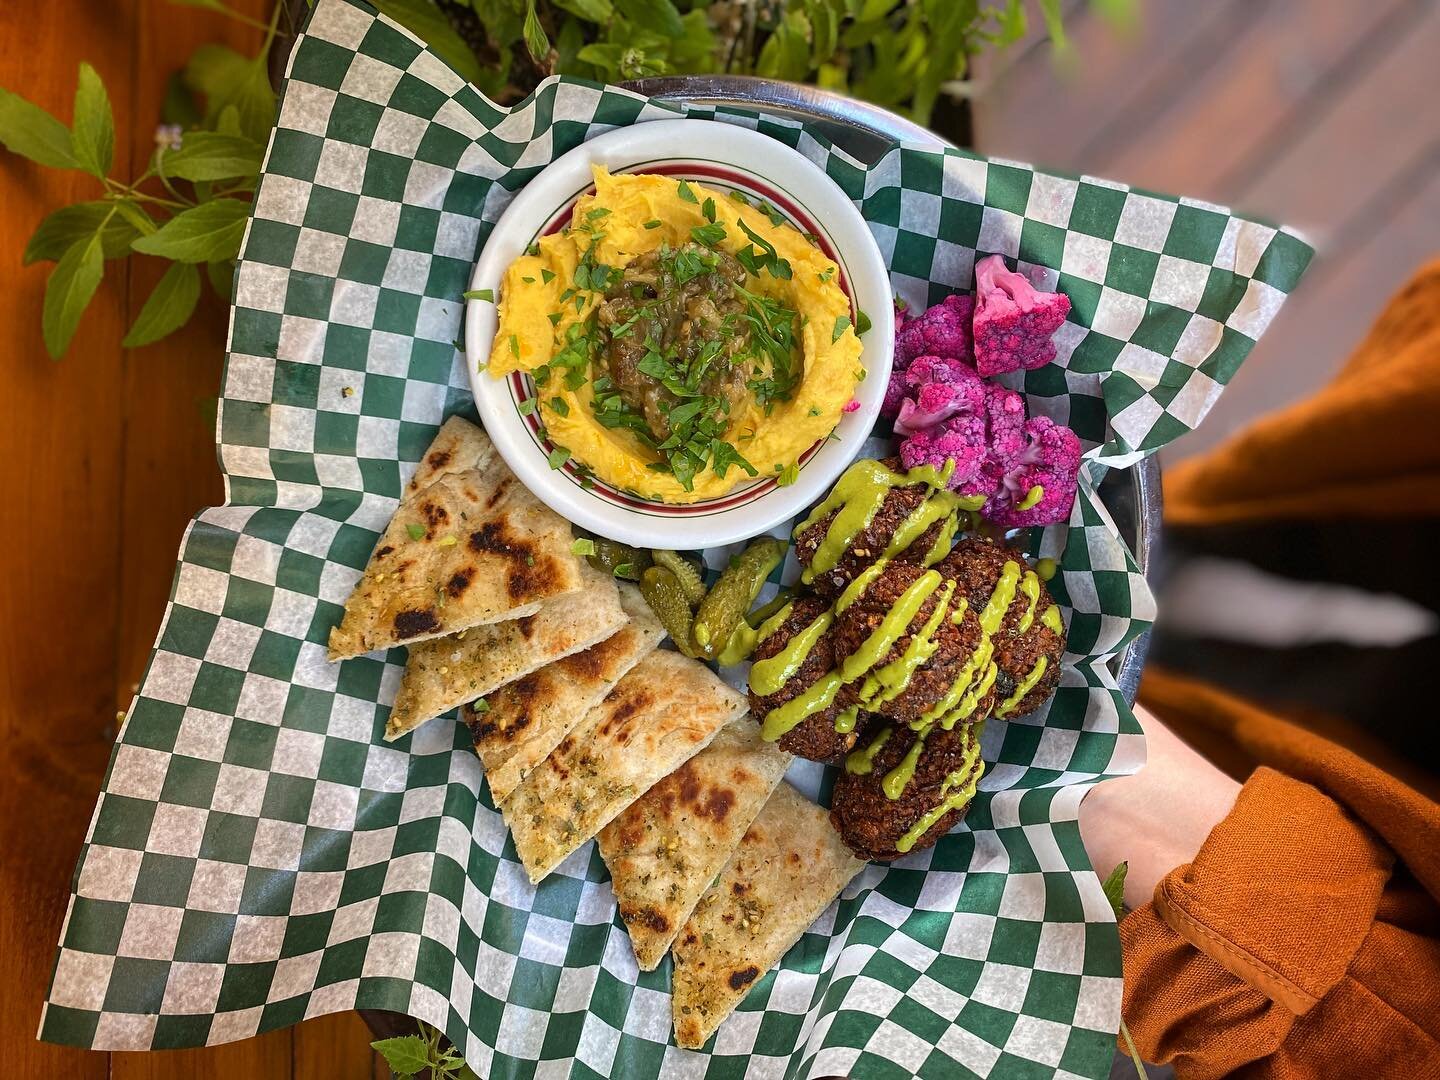 did you know zac makes a mean falafel? our fall menu features a new take on this popular summer dish, with freshly baked flatbread, squash hummus, preserved eggplant, pickles &amp; harissa mint sauce 🧆🧄🍆